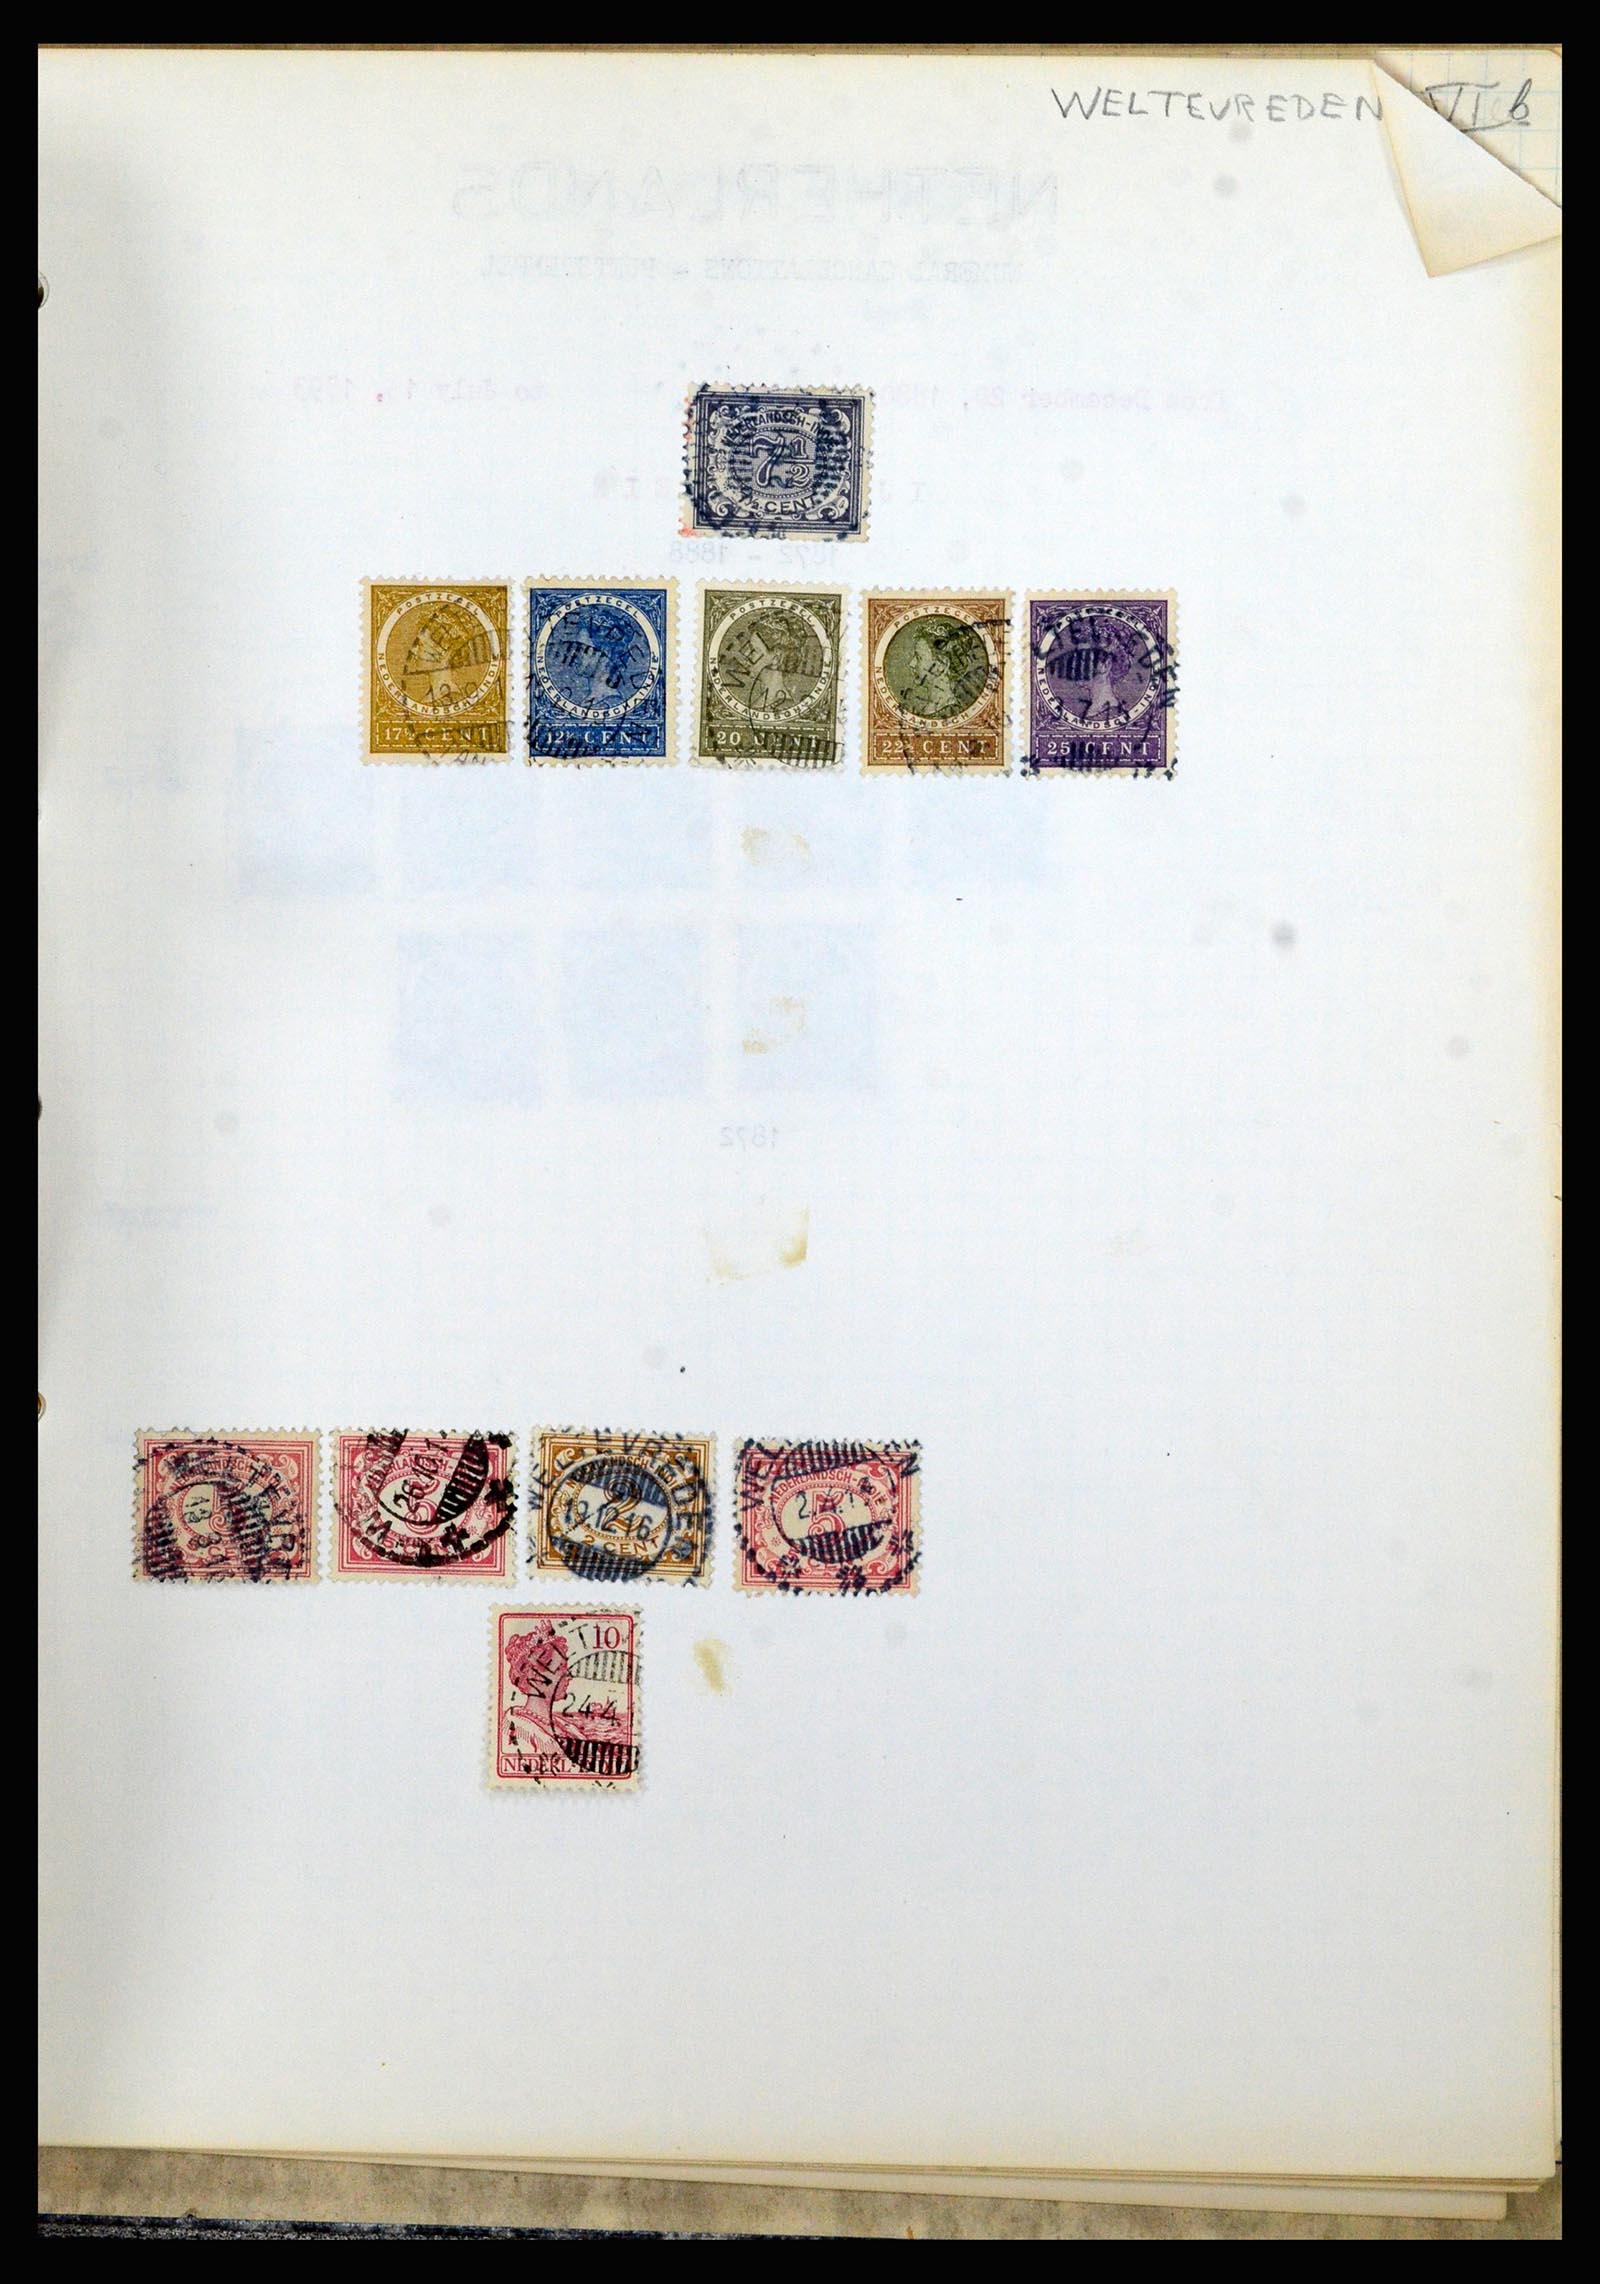 36841 187 - Stamp collection 36841 Dutch east Indies short bar cancels.